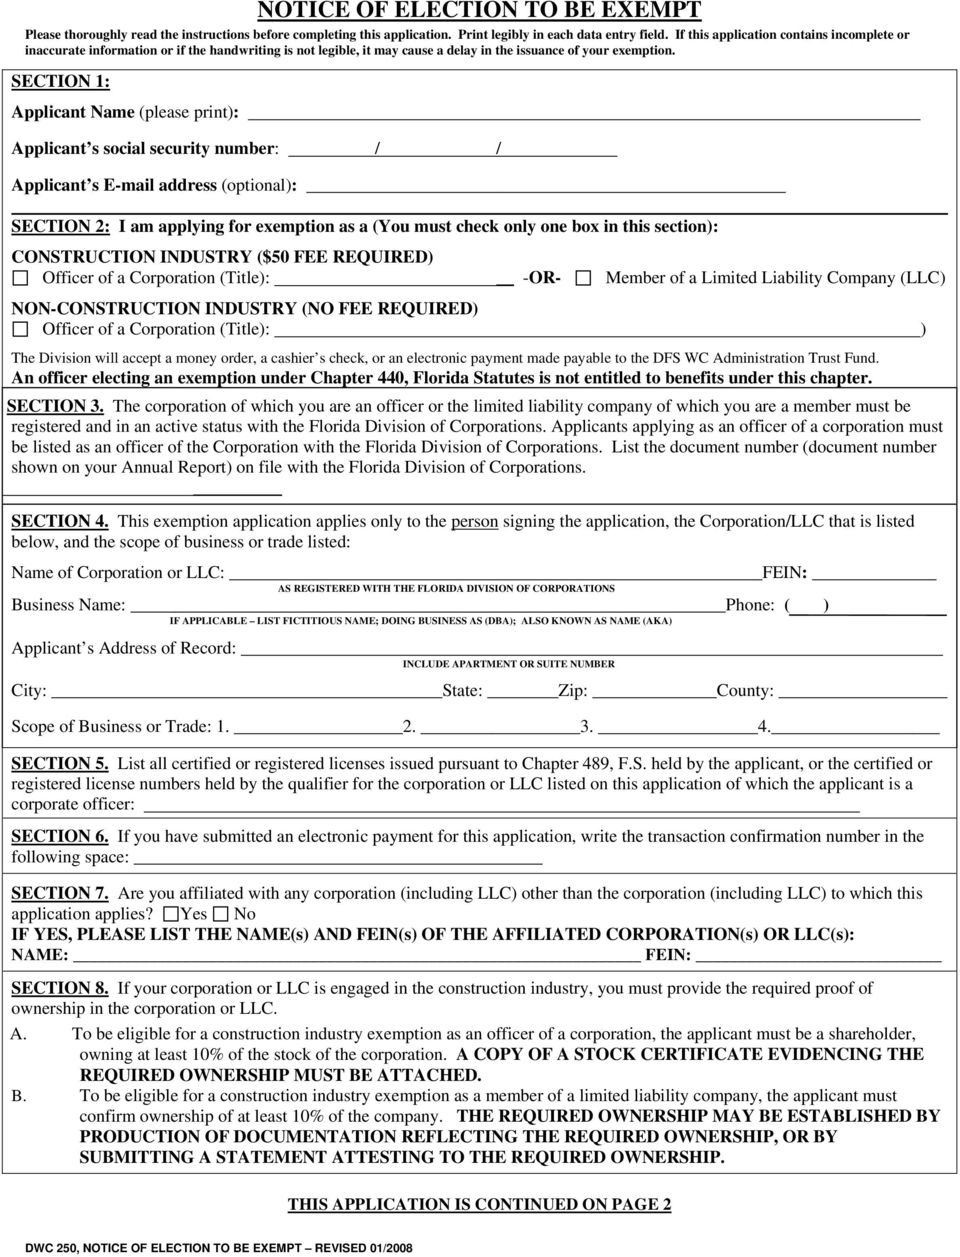 SECTION 1: Applicant Name (please print): Applicant s social security number: / / Applicant s E-mail address (optional): SECTION 2: I am applying for exemption as a (You must check only one box in